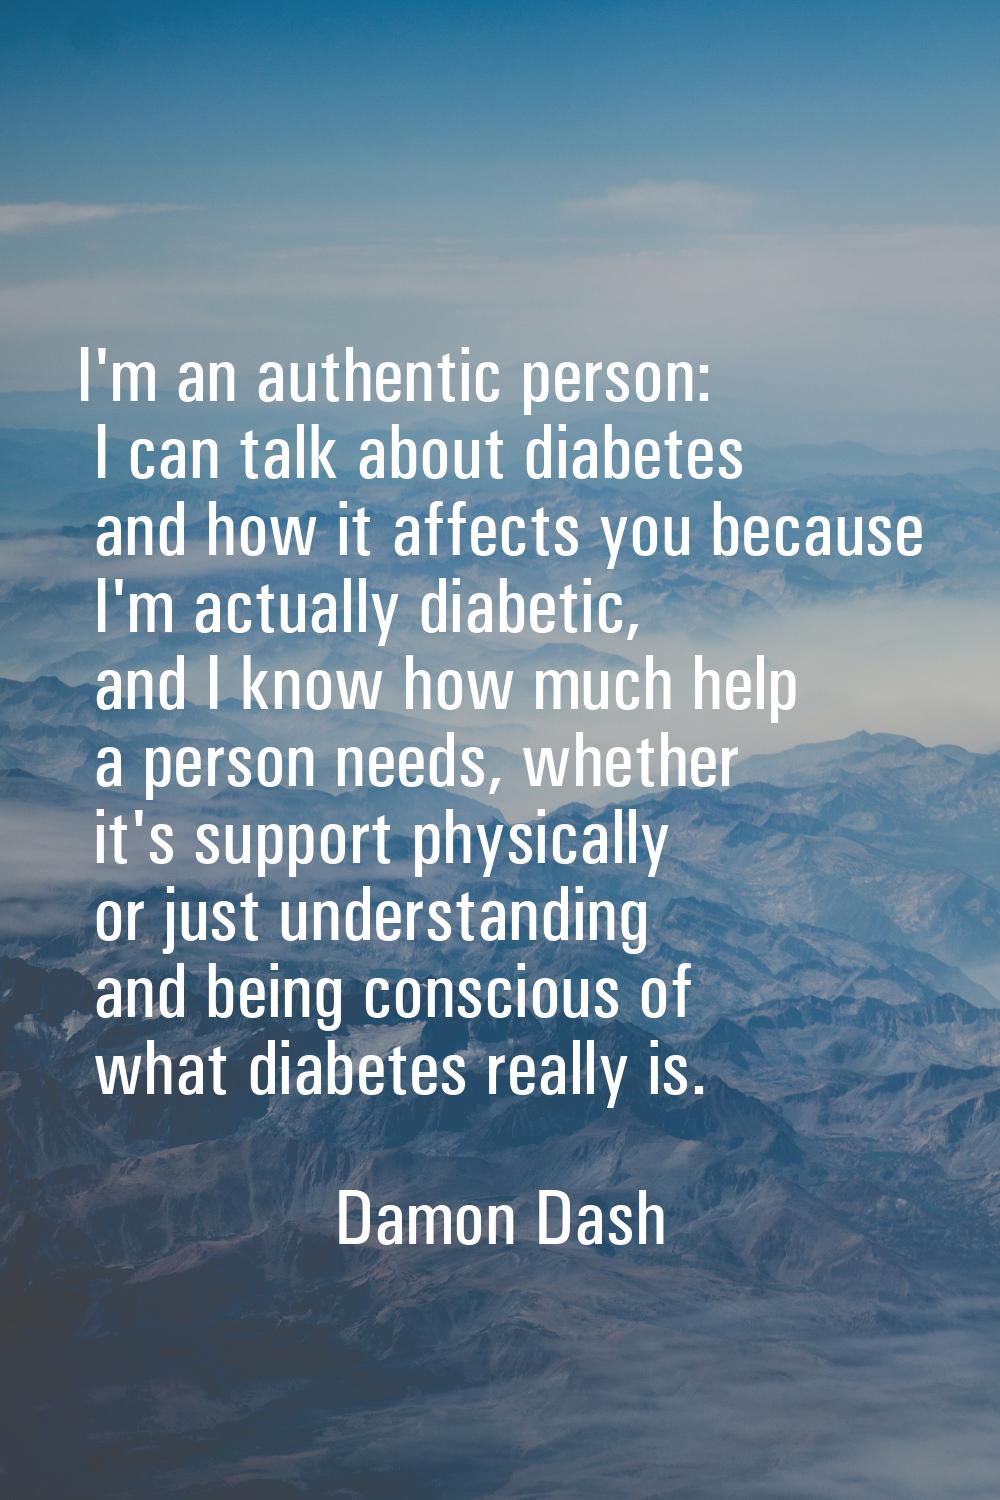 I'm an authentic person: I can talk about diabetes and how it affects you because I'm actually diab